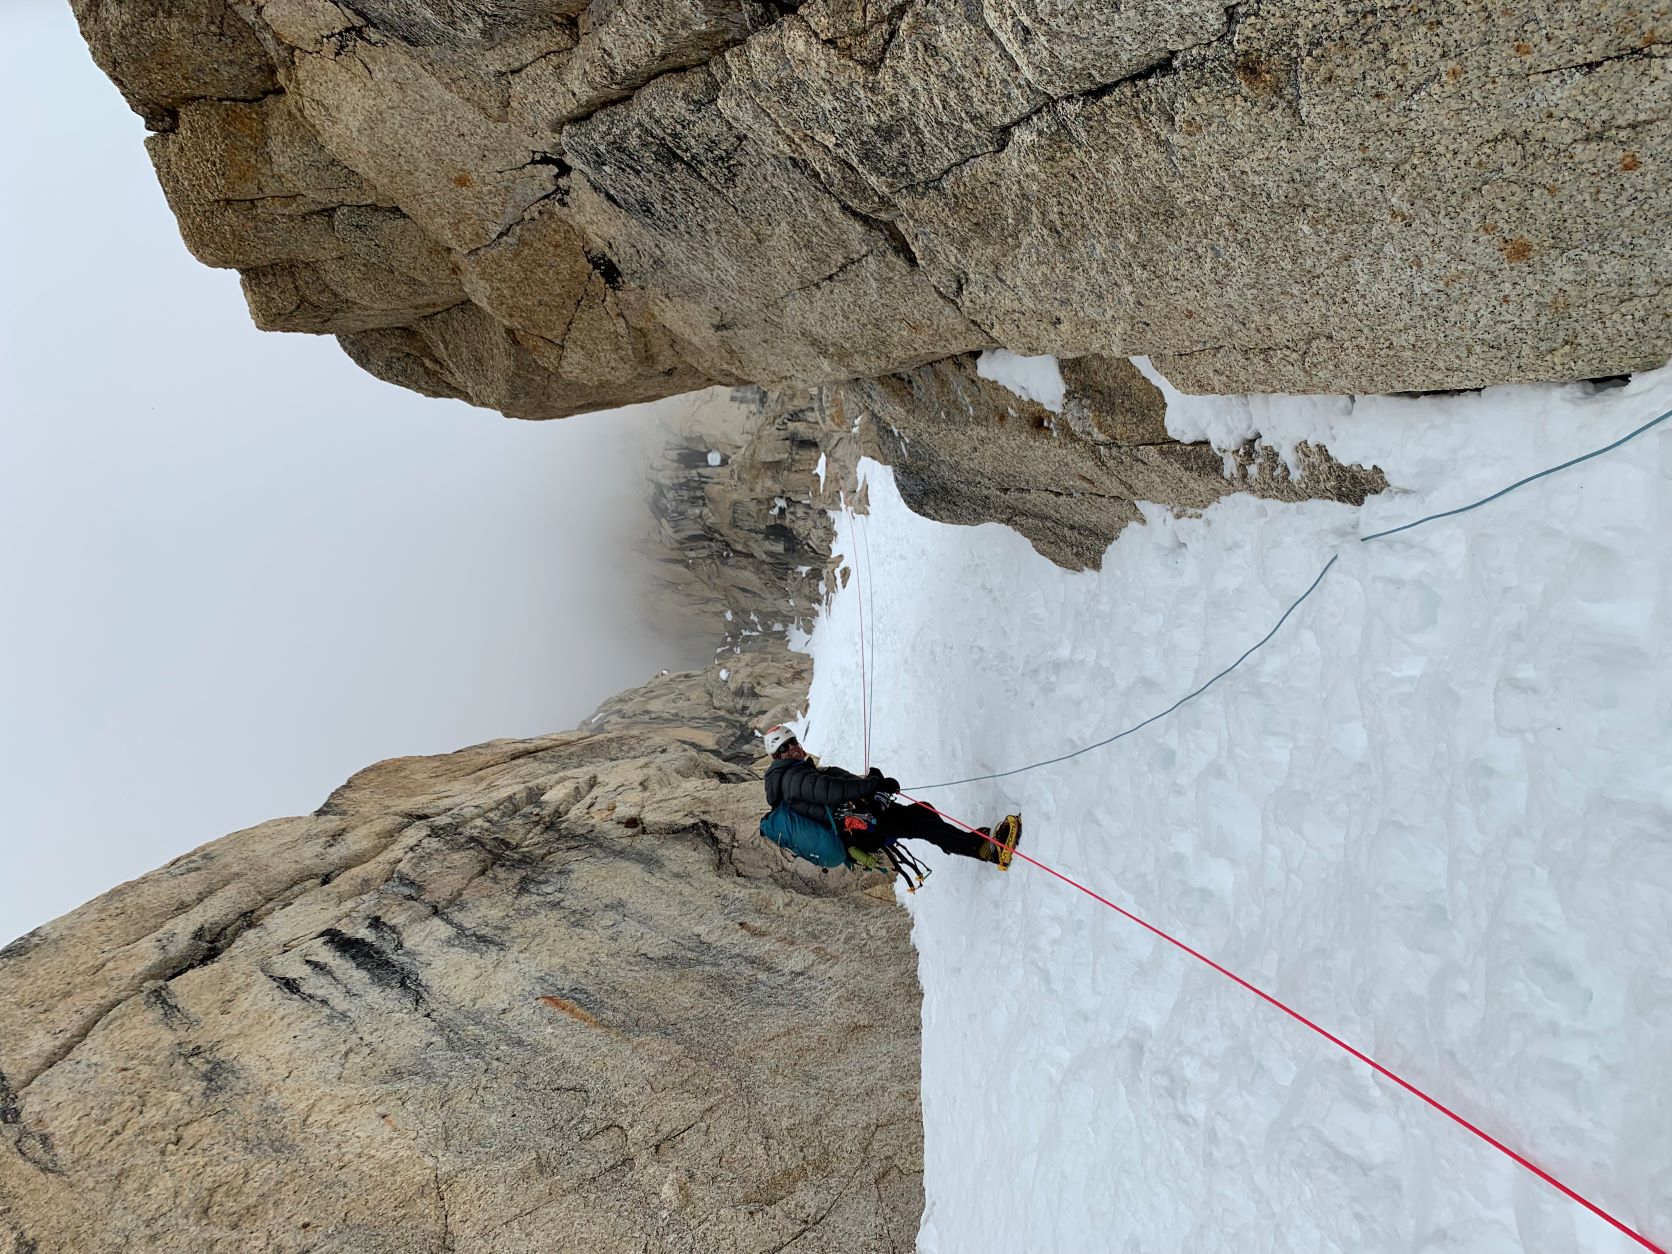 A roped climber peers down from a snow gulley lined with steep rock walls